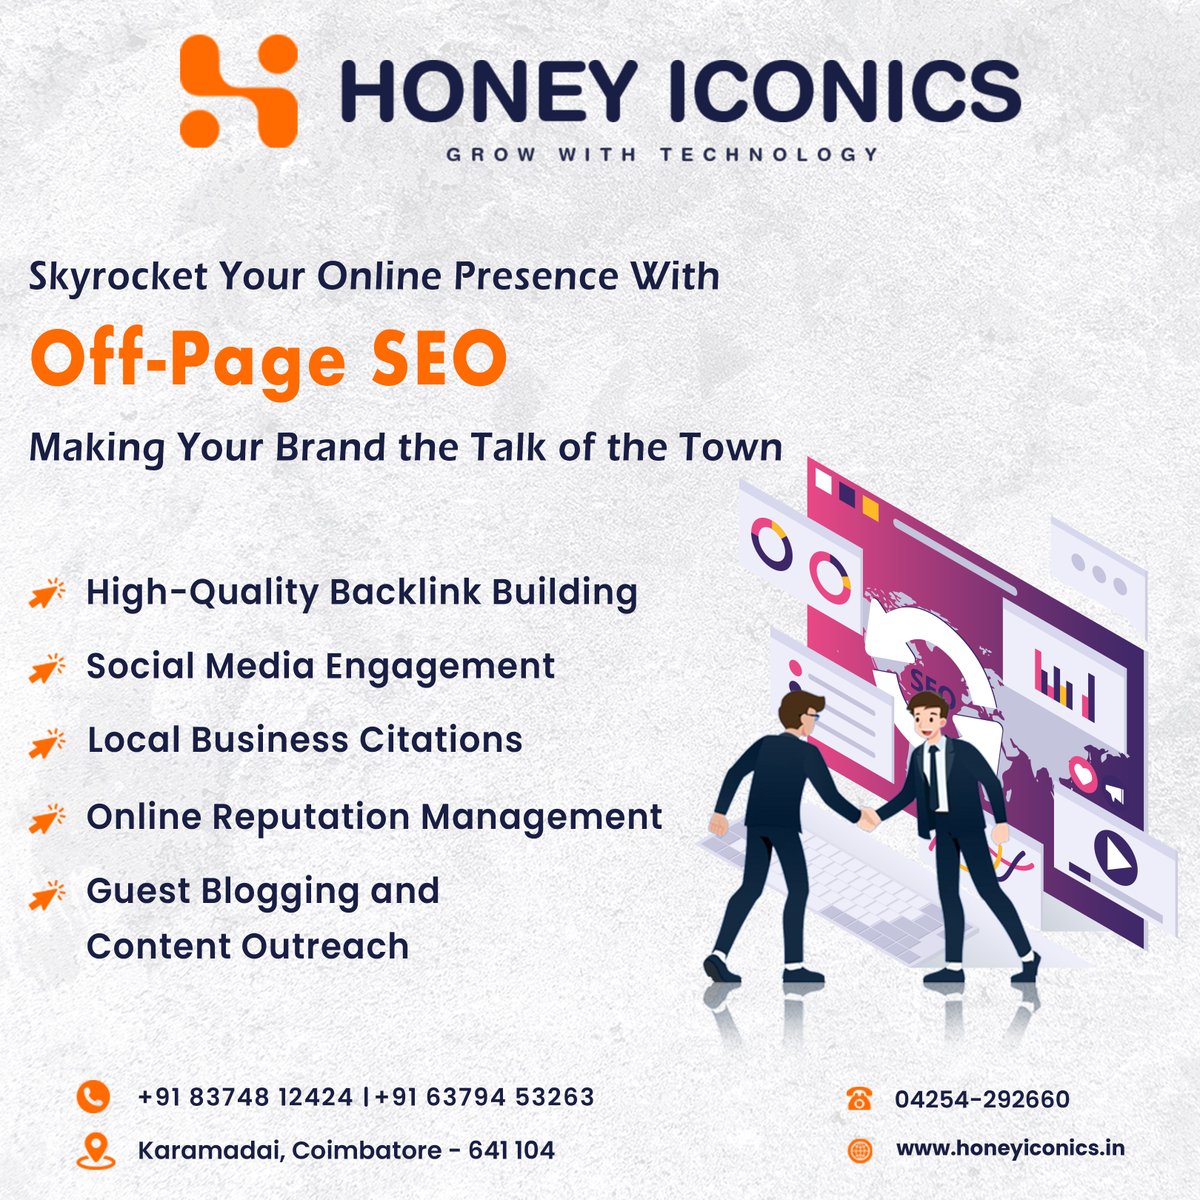 Elevate Your Online Presence with the Best SEO Company in Coimbatore! 🚀
Are you ready to skyrocket your website's rankings and dominate search engine results?
#CoimbatoreSEO #DigitalDominance
#Honeyiconics #WebsiteDesign #BusinessGrowth #DigitalSuccess #DigitalMarketing